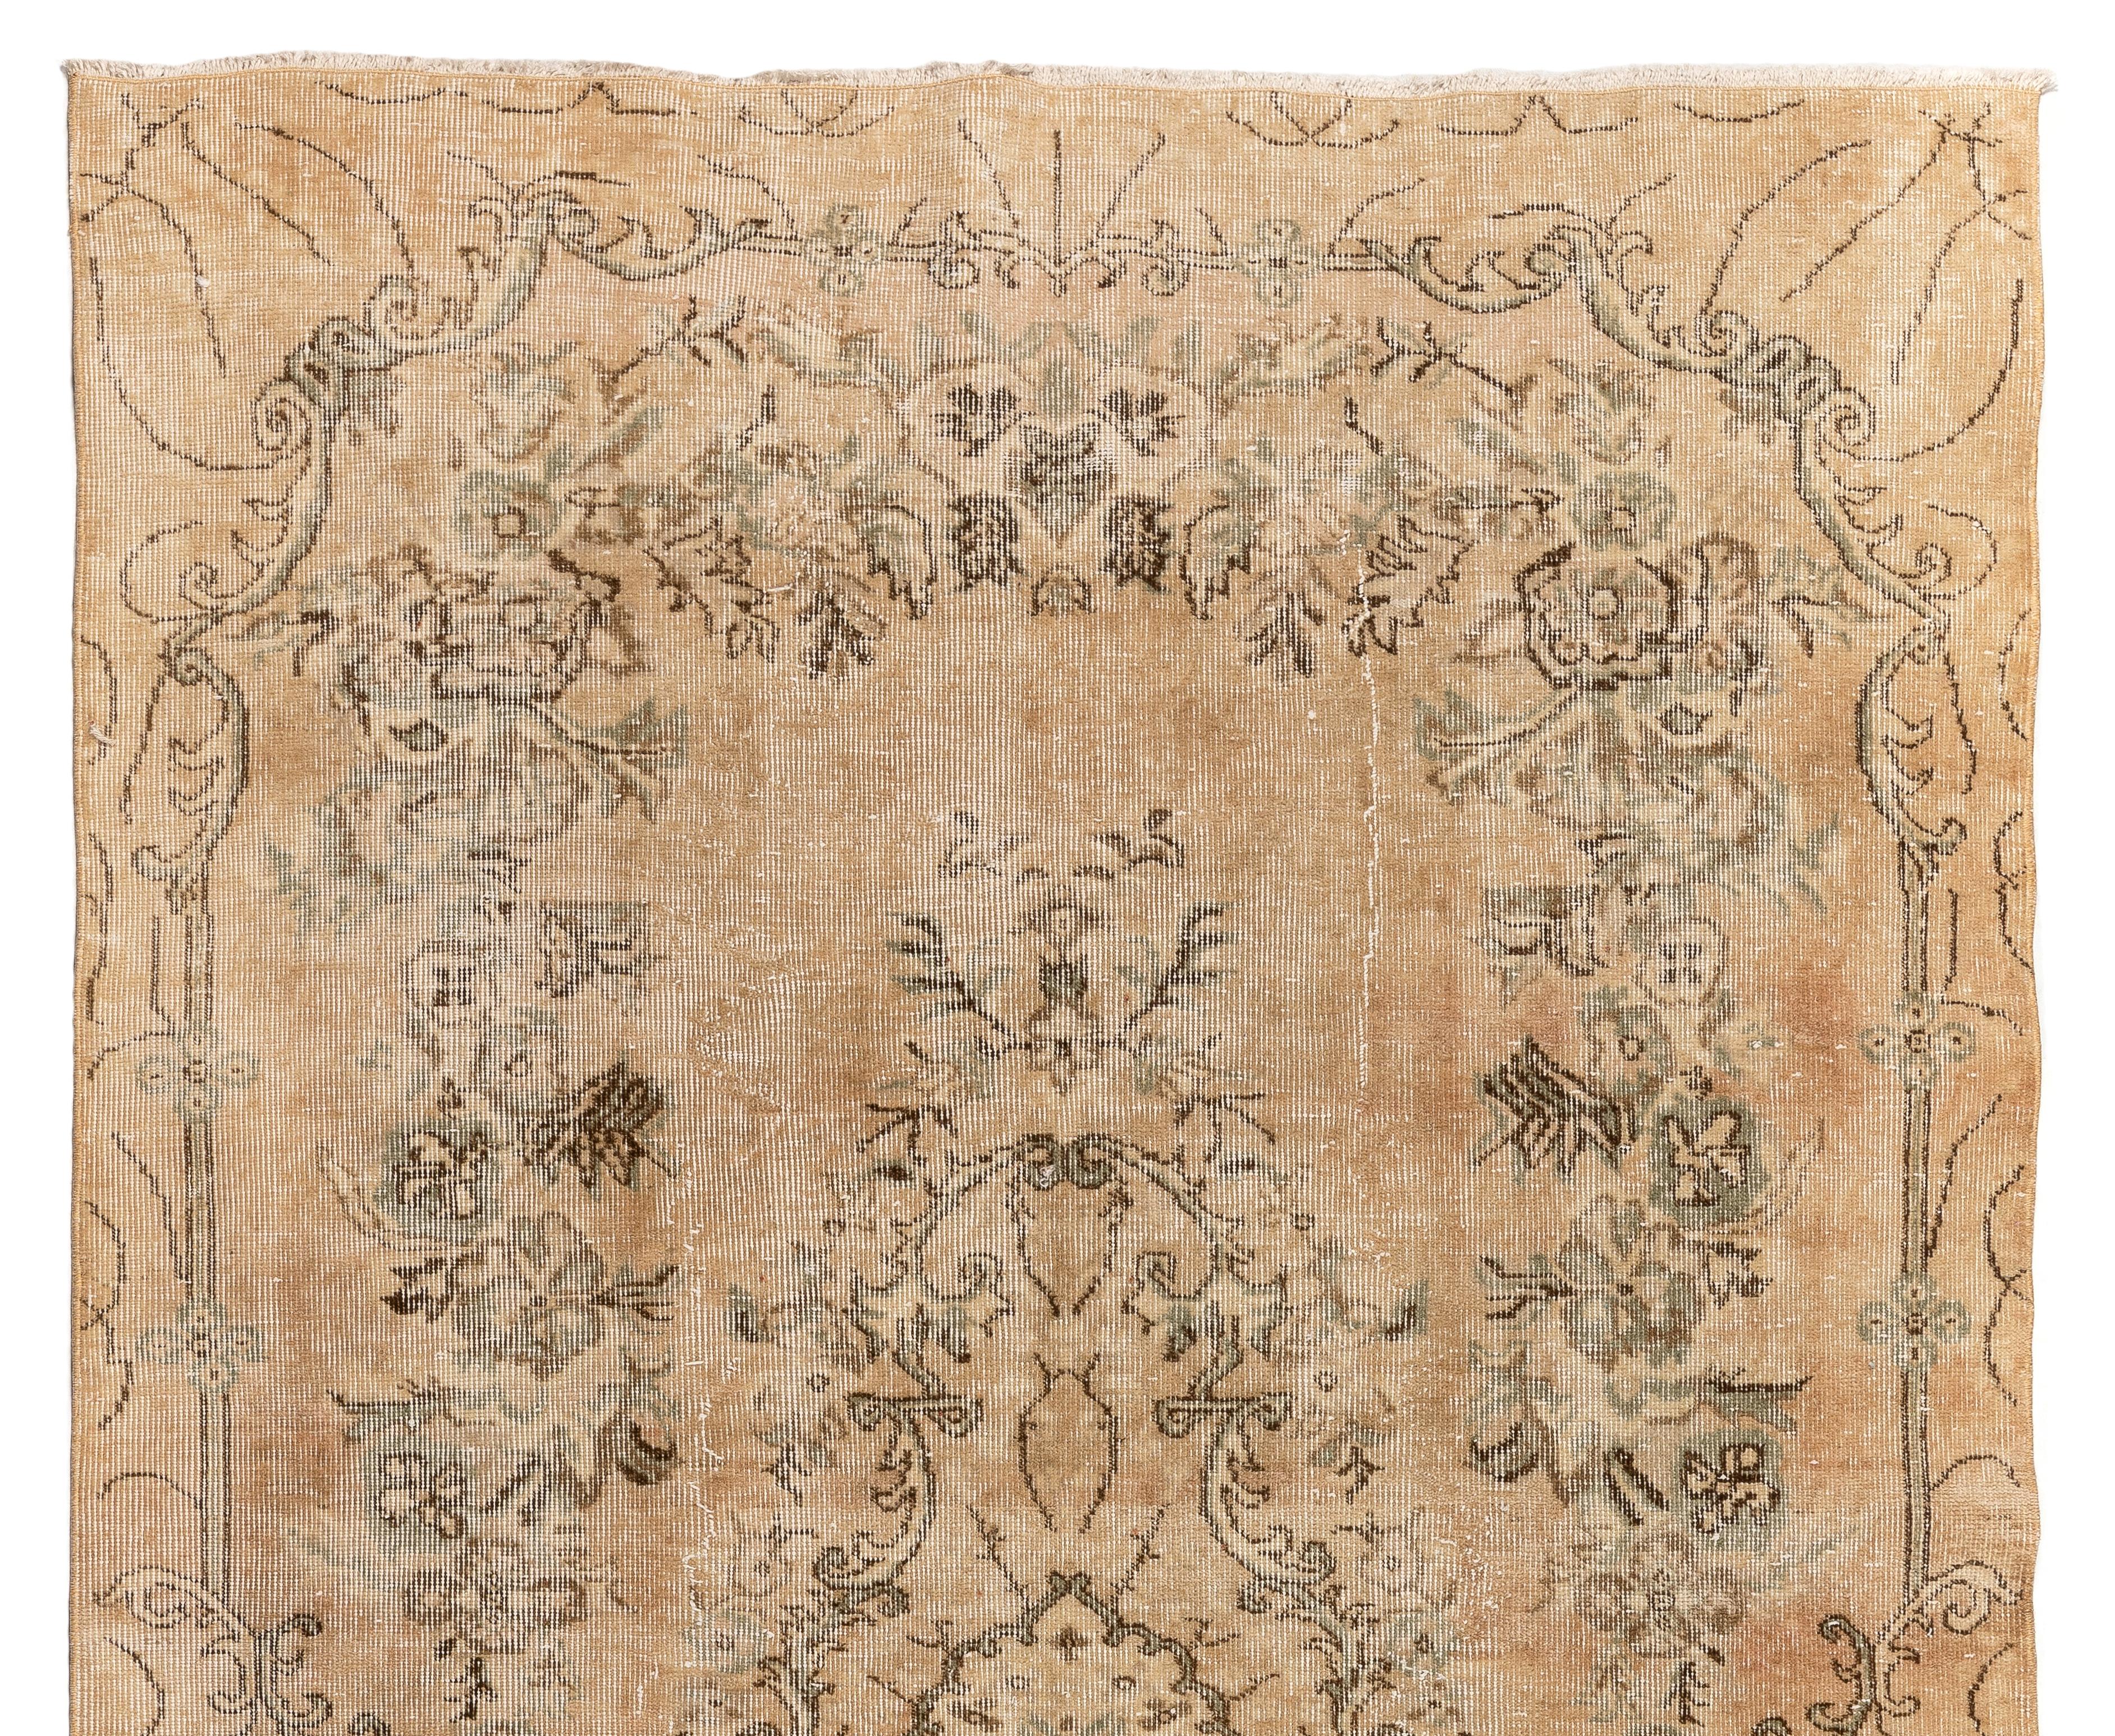 A finely hand knotted rug from Central Anatolia with soft neutral colors and low wool pile on cotton foundation. The rug is in very good condition and washed professionally. It is heavy and lays flat on the floor, suitable for both residential and